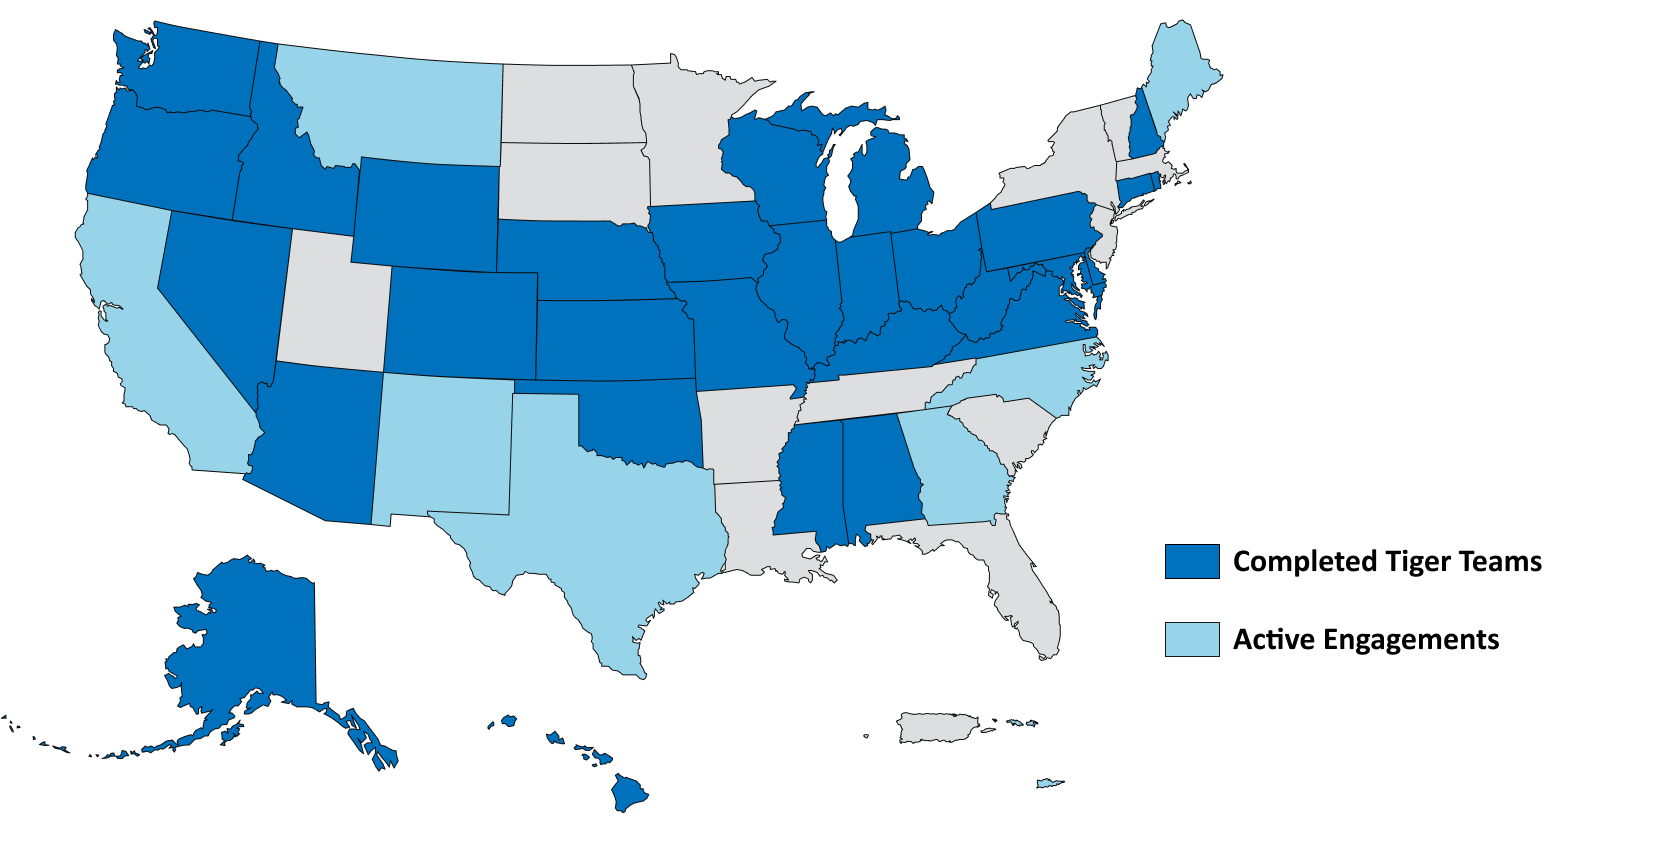 States that have participated in or are currently participating in Tiger Team engagements